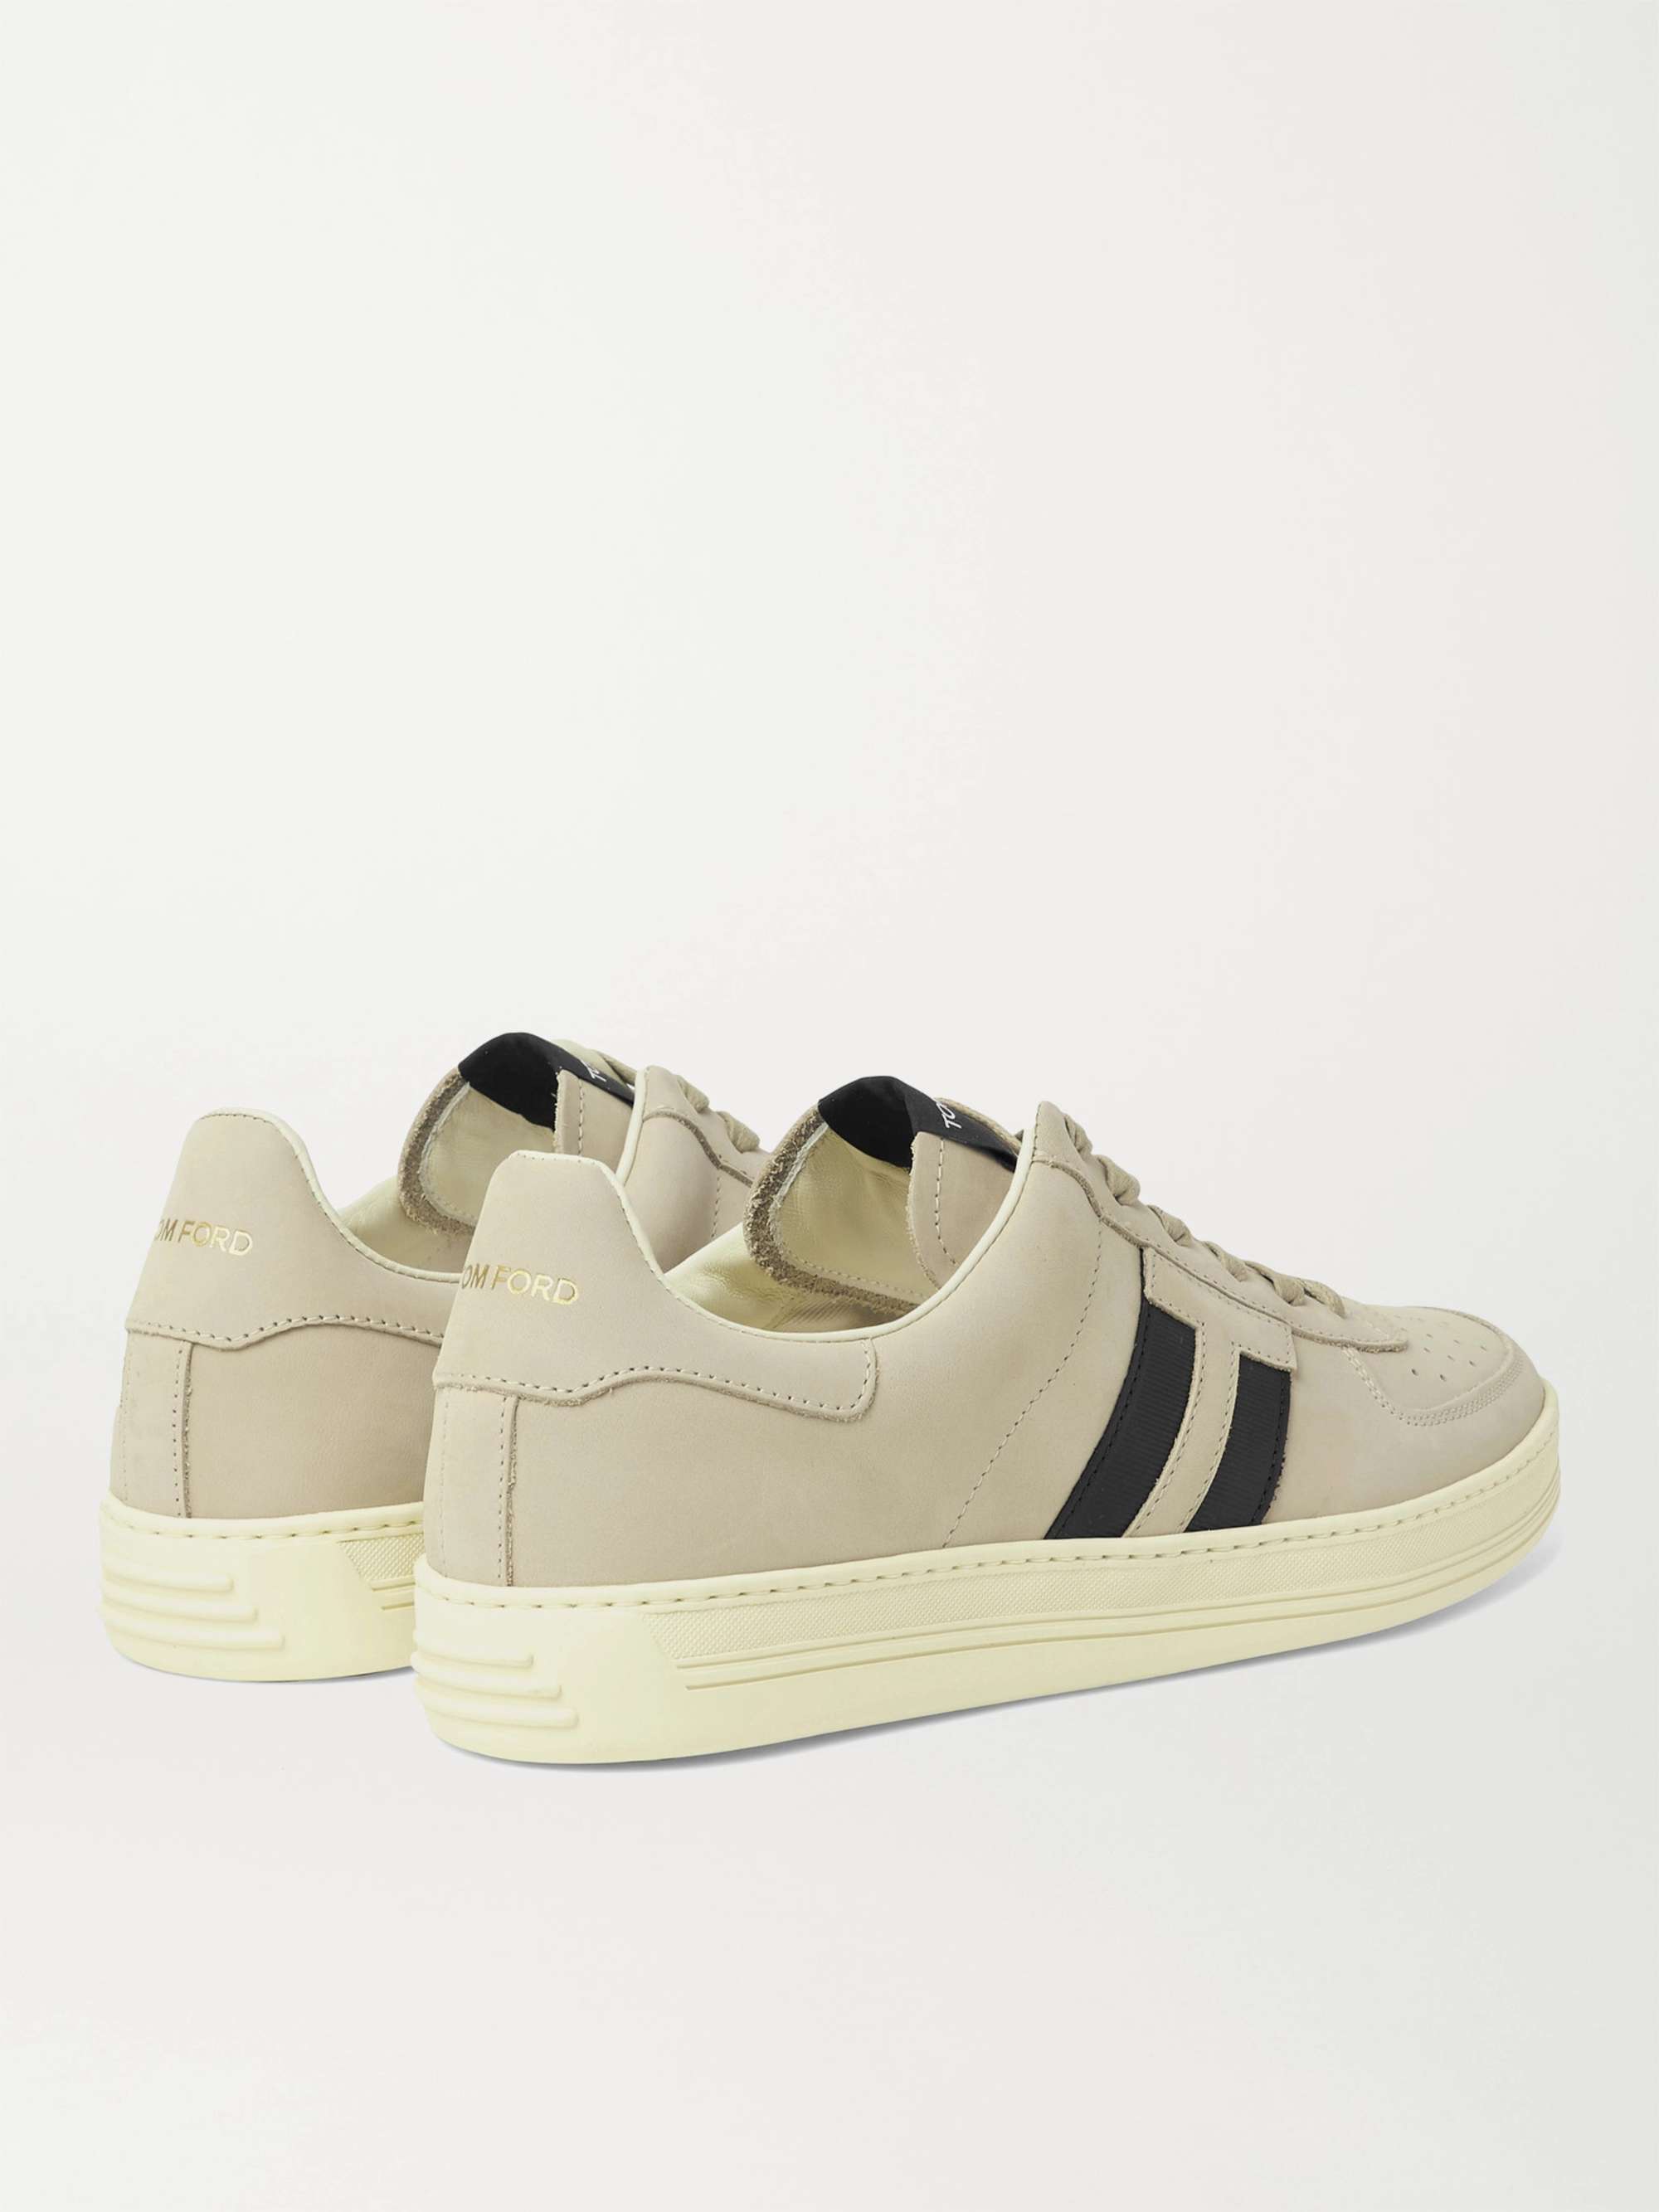 TOM FORD Radcliffe Leather-Trimmed Nubuck Sneakers